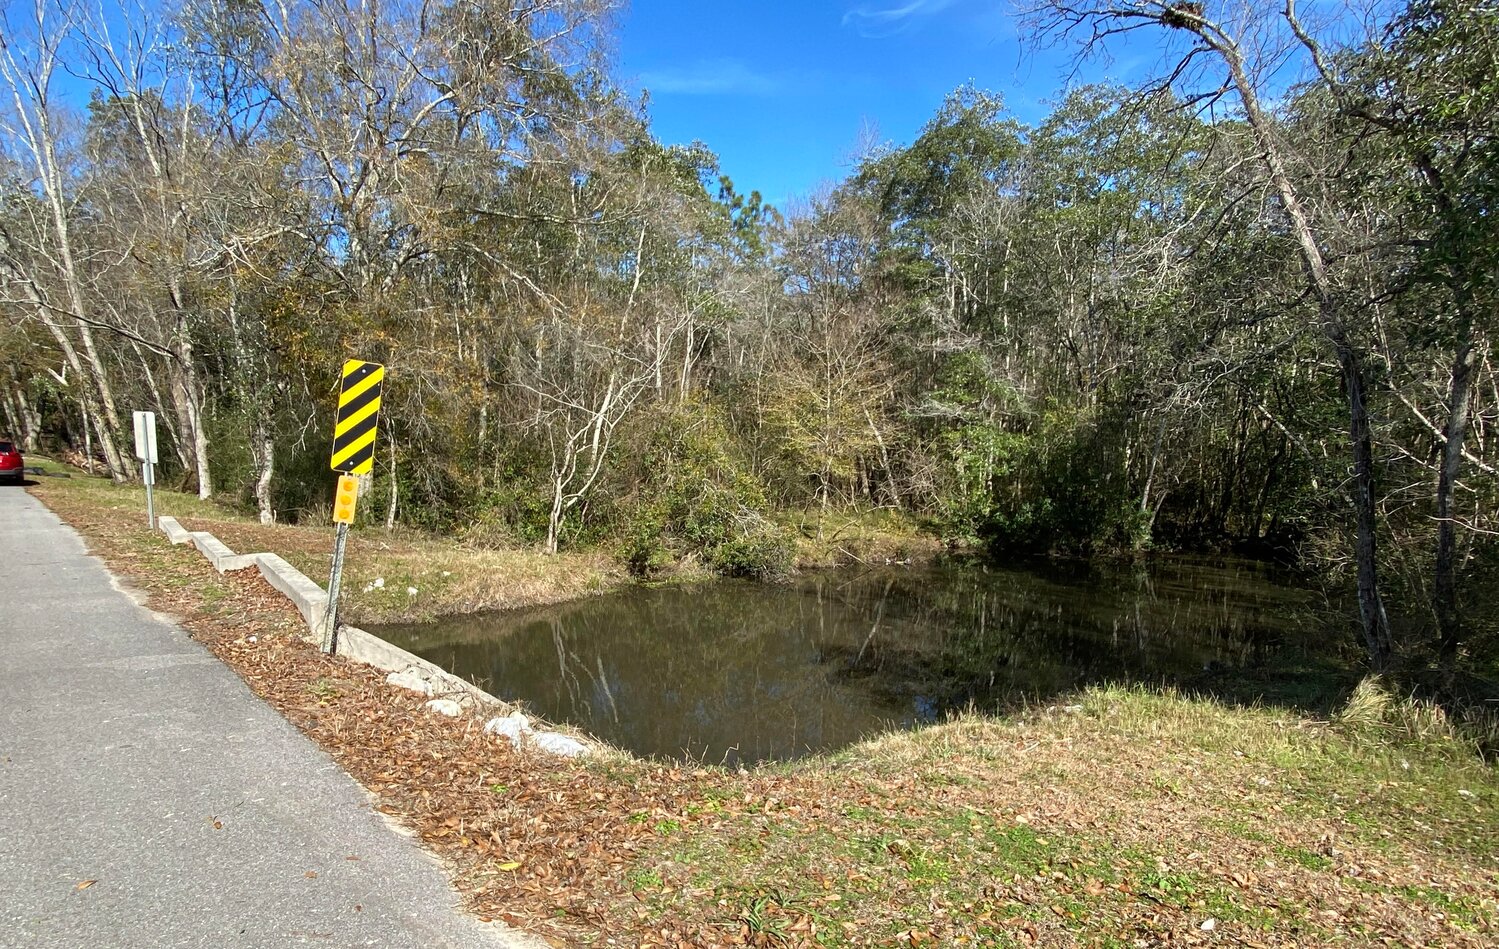 Wolf Creek on South Pecan Street in Foley is one of the areas where the city has been working on resilience projects. The creek washed out the road during heavy flooding in 2014, but the site was not affected by flooding during Hurricane Sally in 2020.